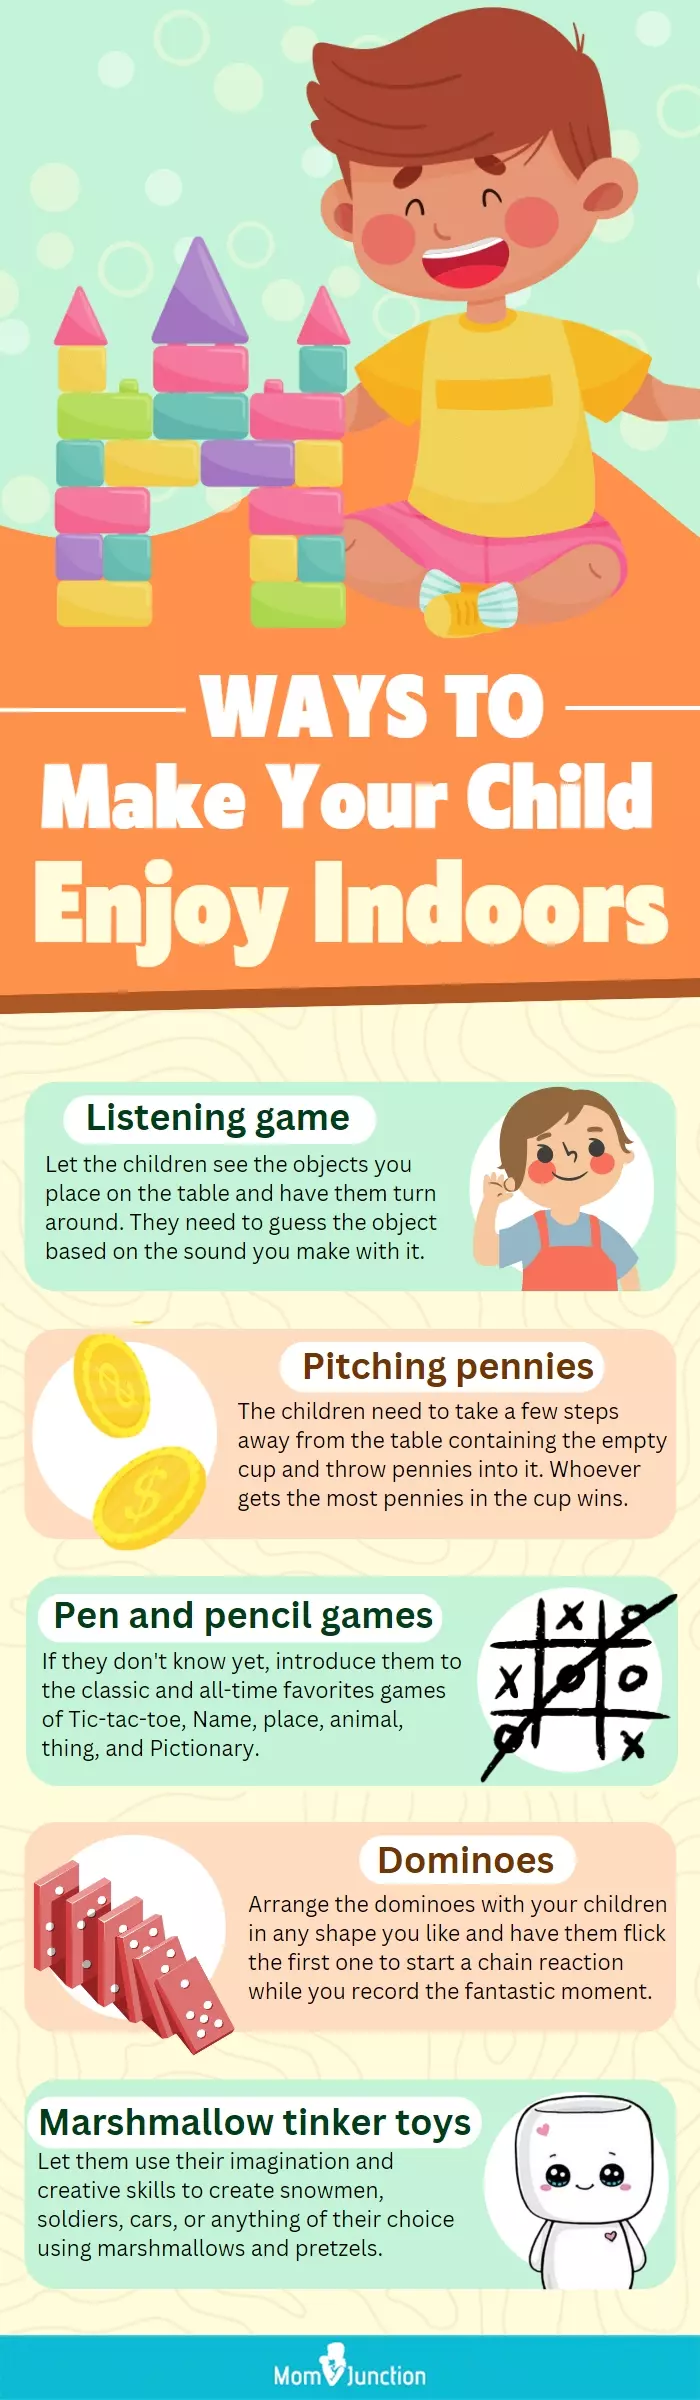 ways to make your child enjoy indoors (infographic)